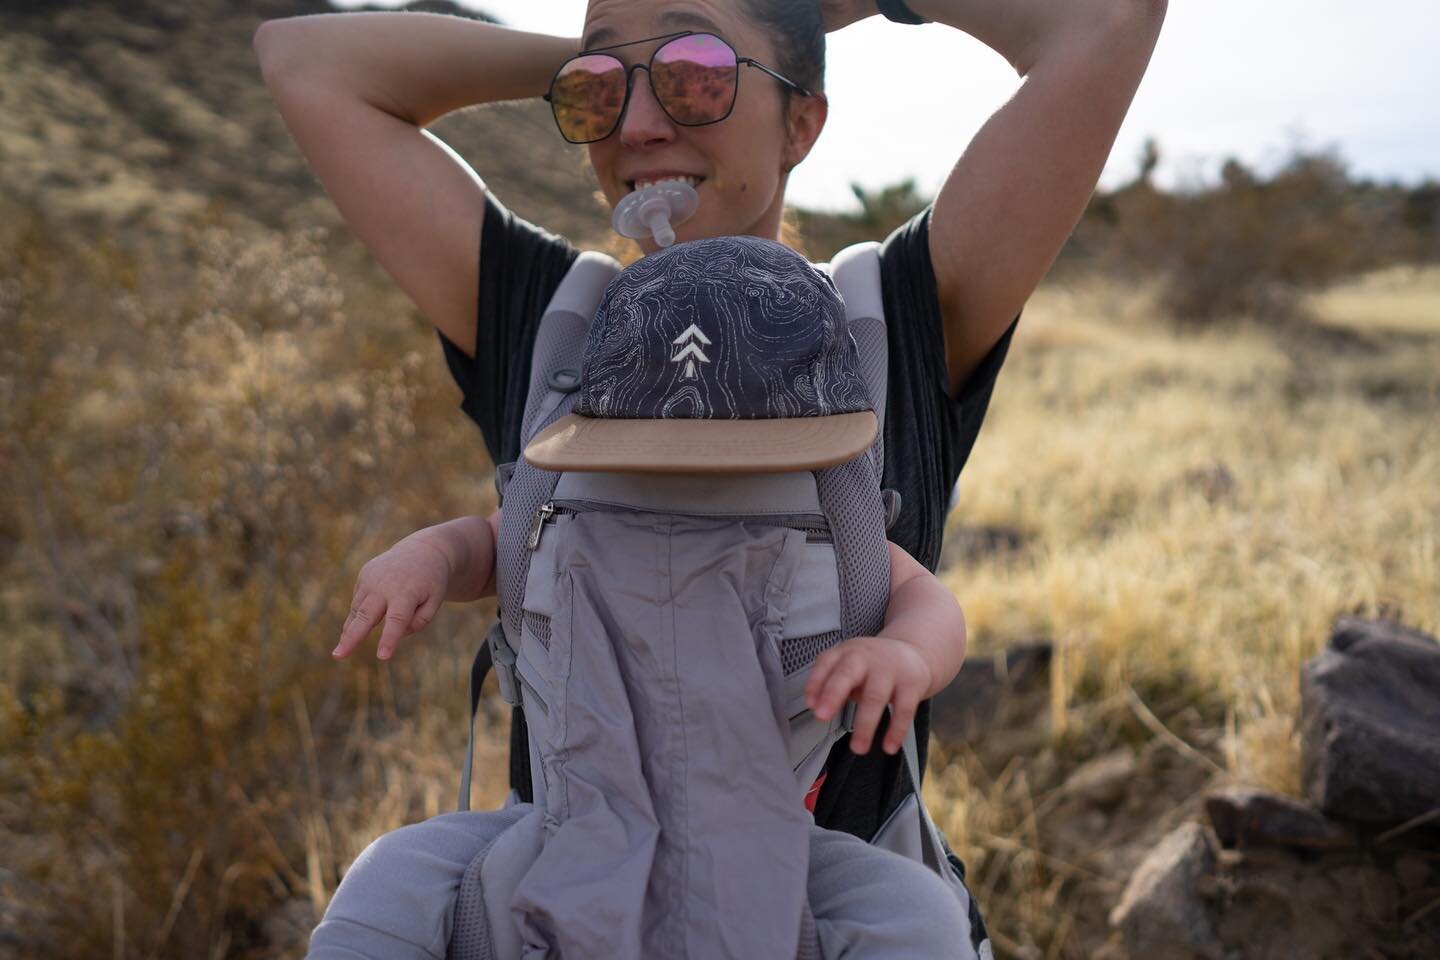 Still getting the hang of this hiking with a baby thing.